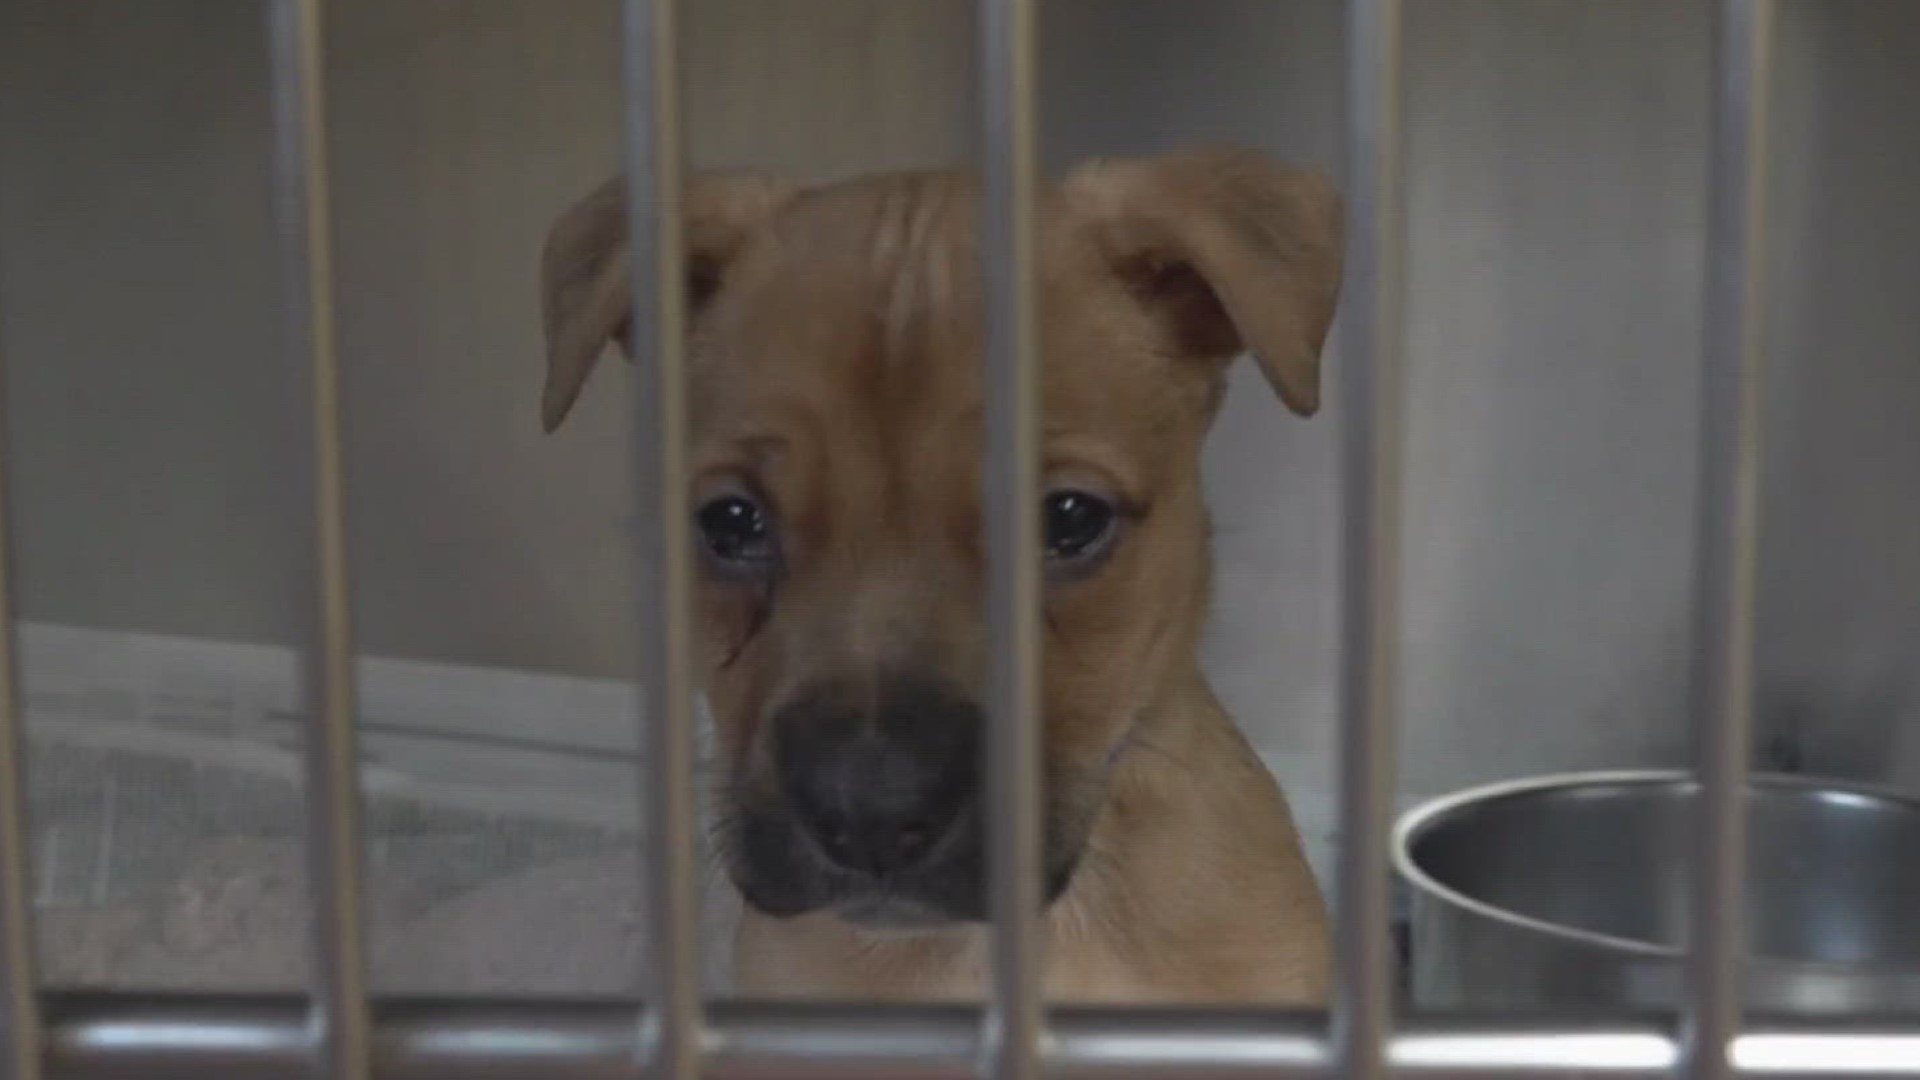 “They will still put a dog down when there are empty kennels available," one shelter volunteer said.